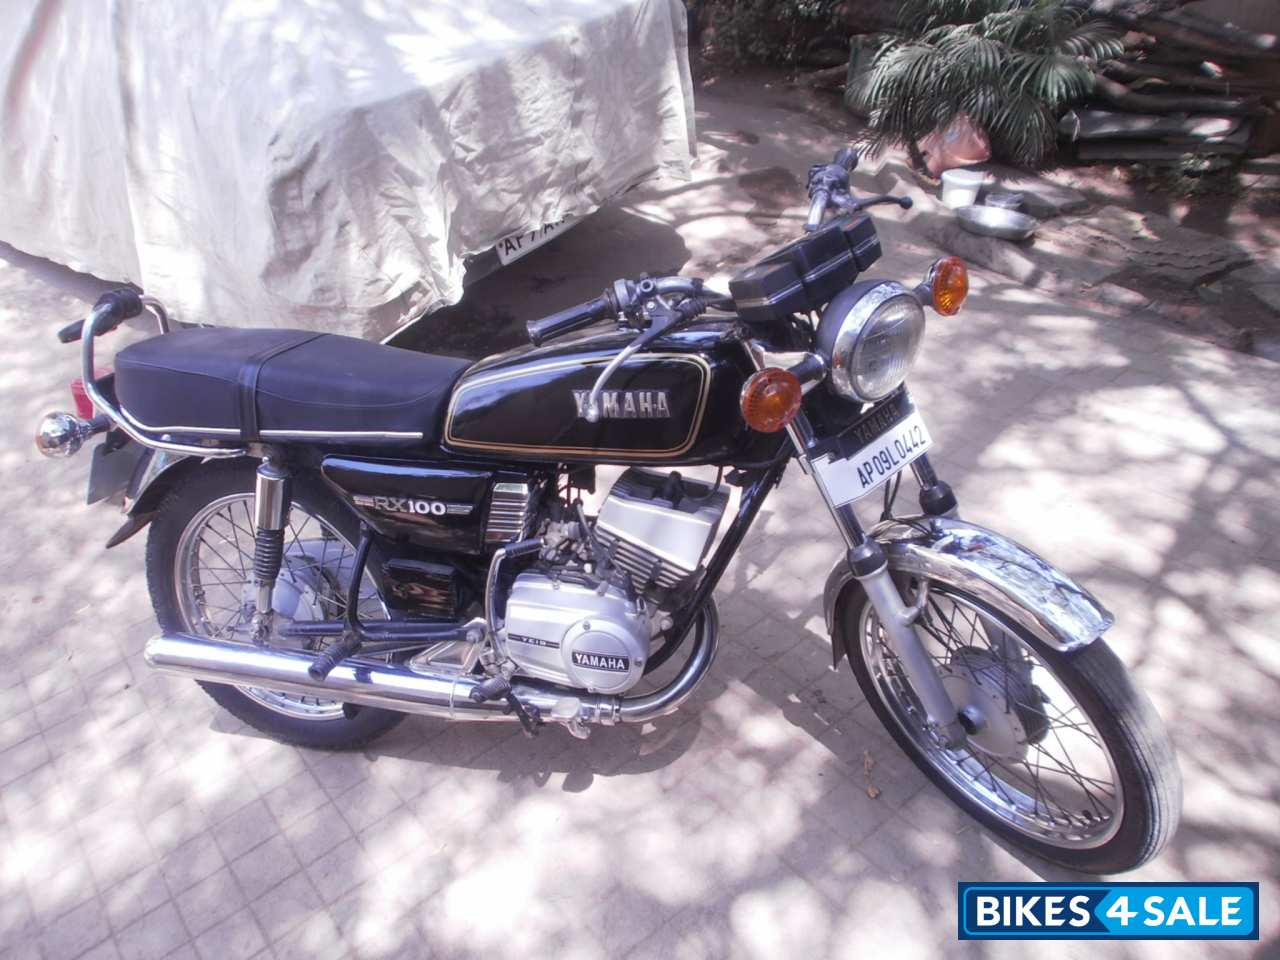 Used 1996 Model Yamaha Rx 100 For Sale In Hyderabad Id Black Colour Bikes4sale